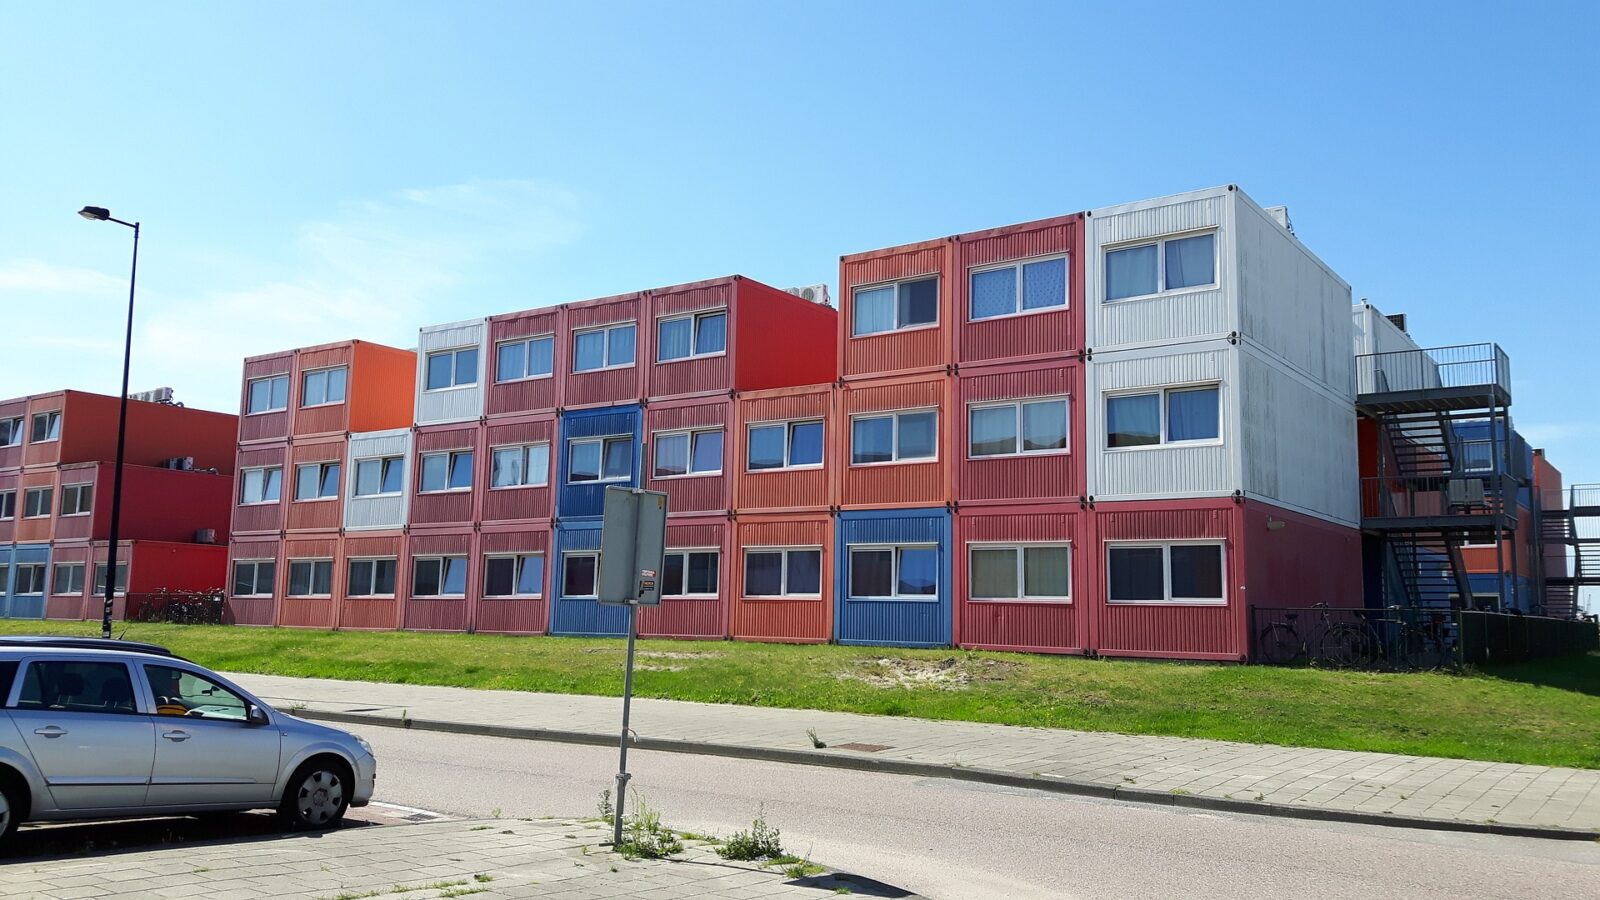 Block of apartments built with shipping containers